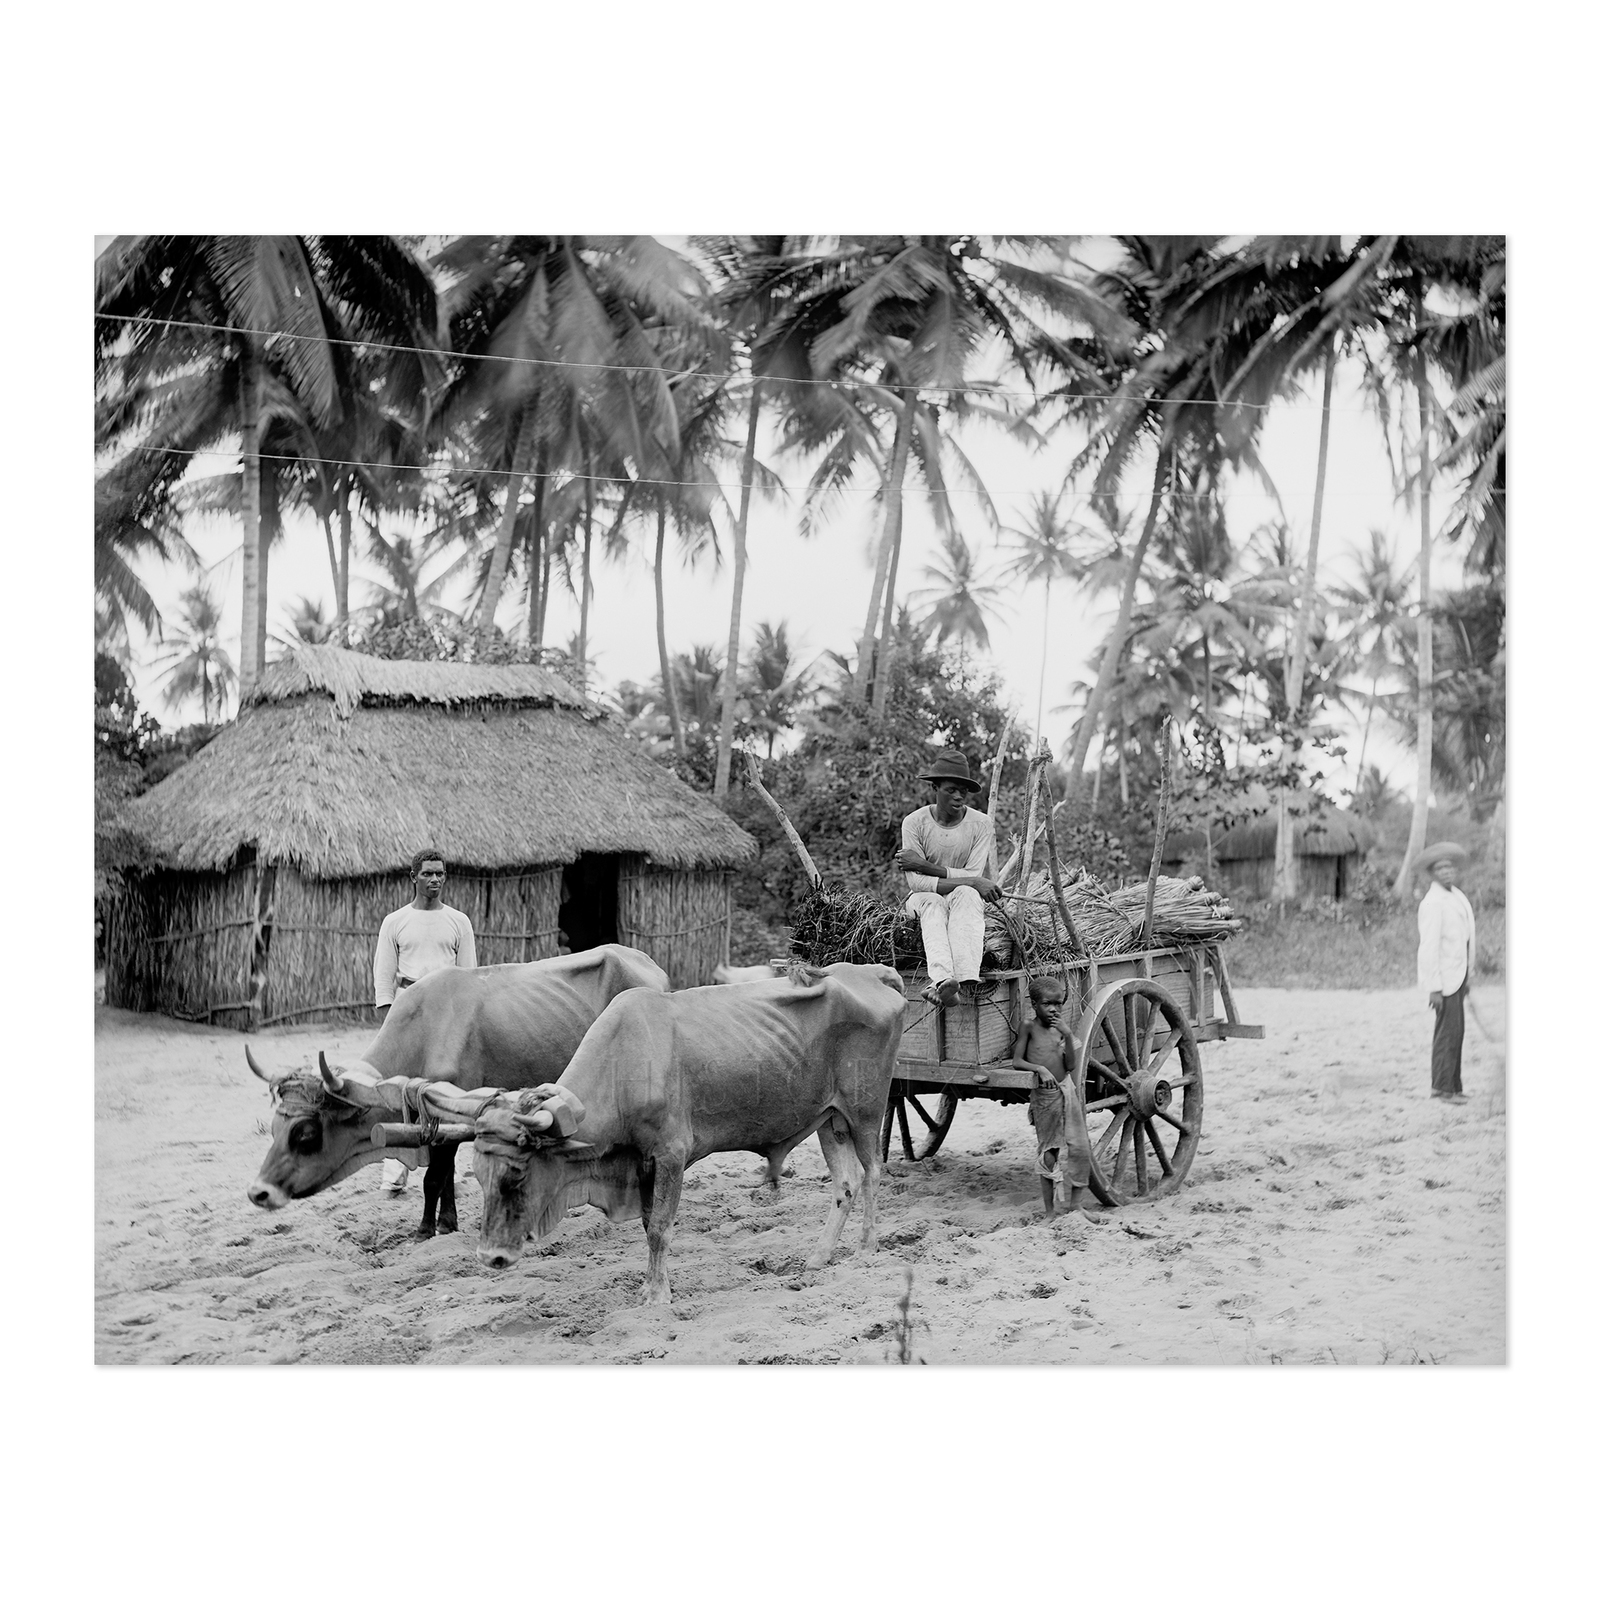 1903 Puerto Rican Country Scene Photo Print Wall Art Poster - $16.99 - $59.99